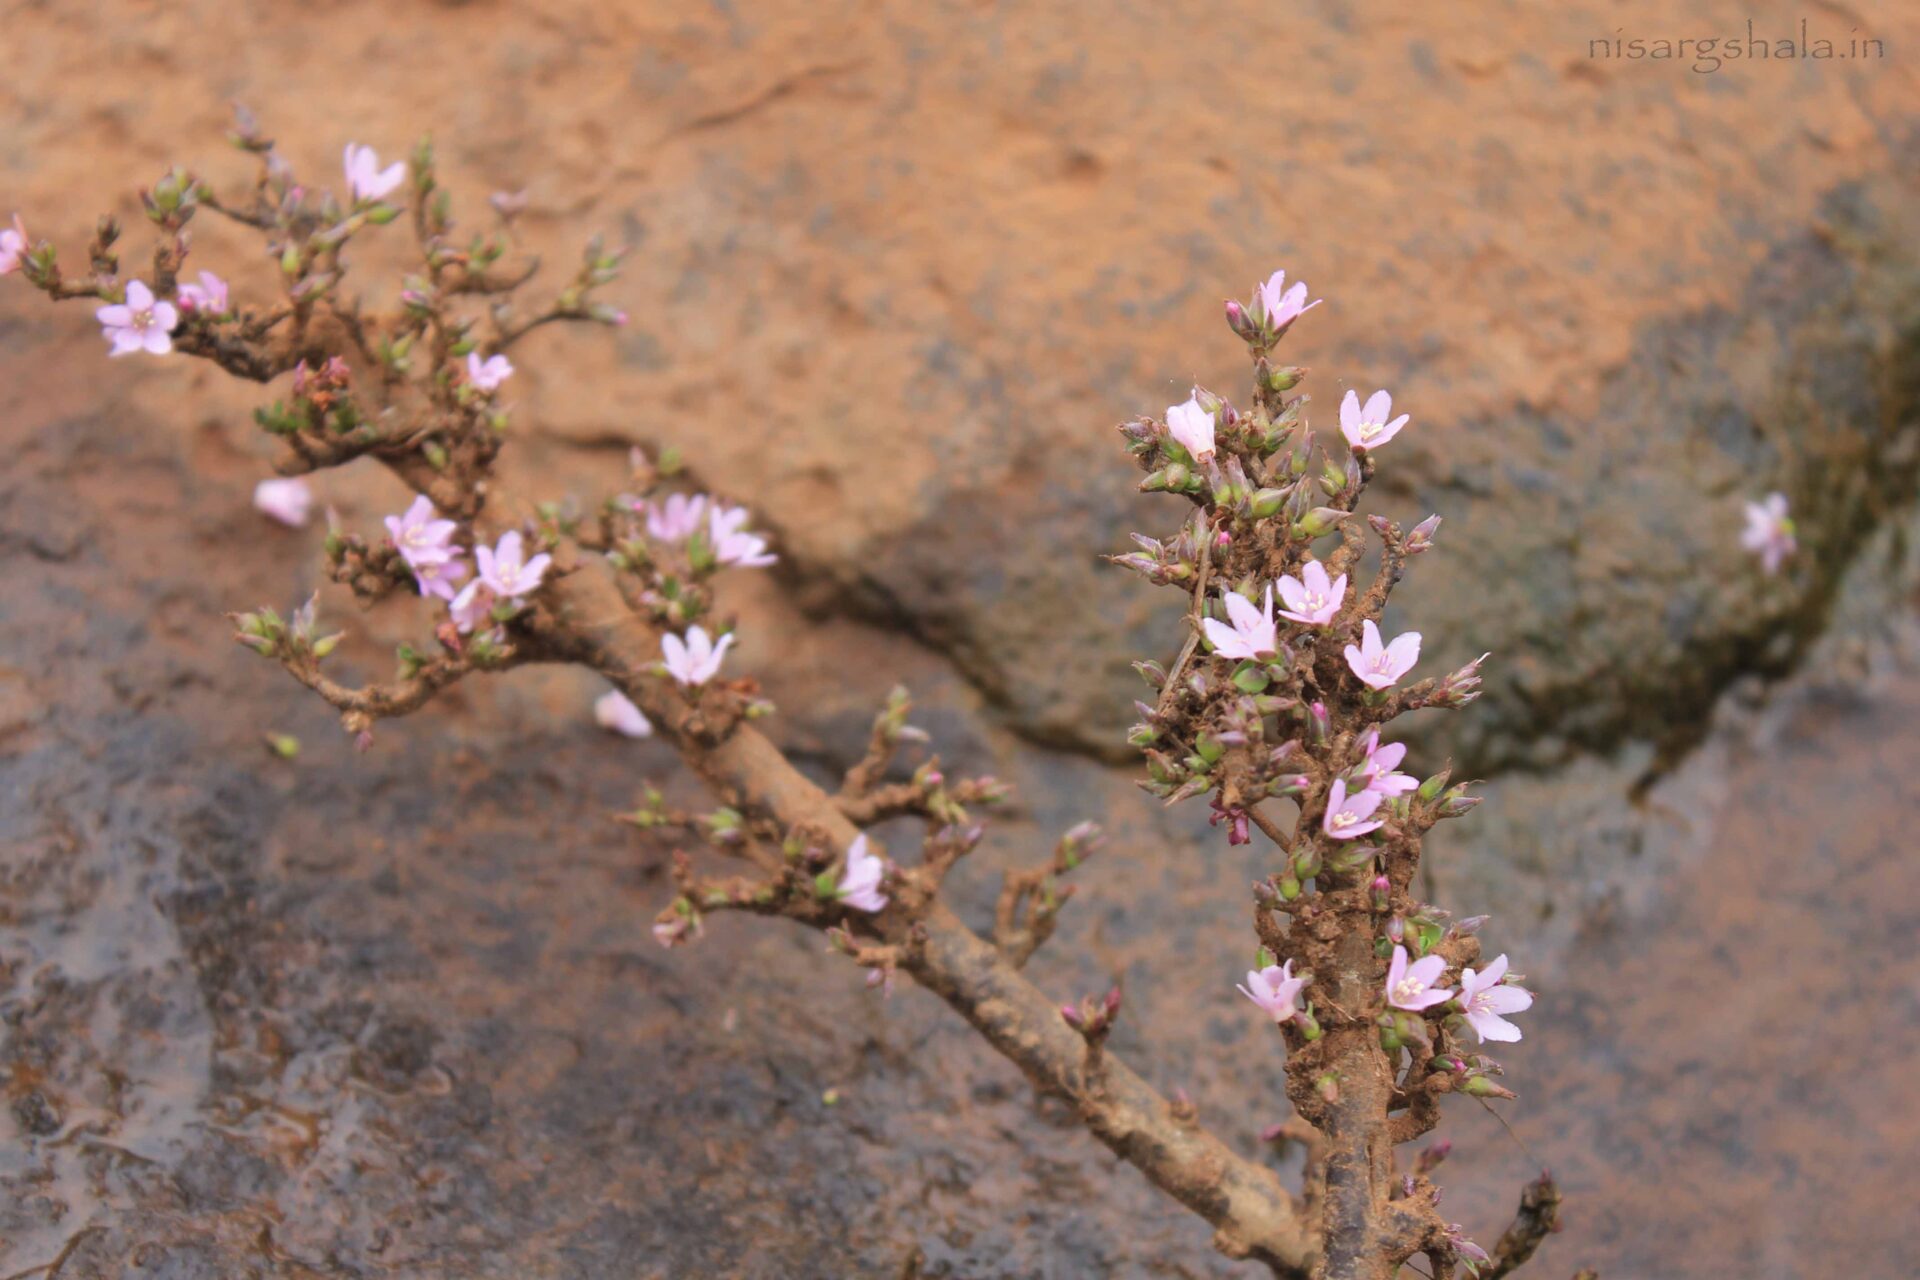 A plant bearing flowers in the riverbed near camp site